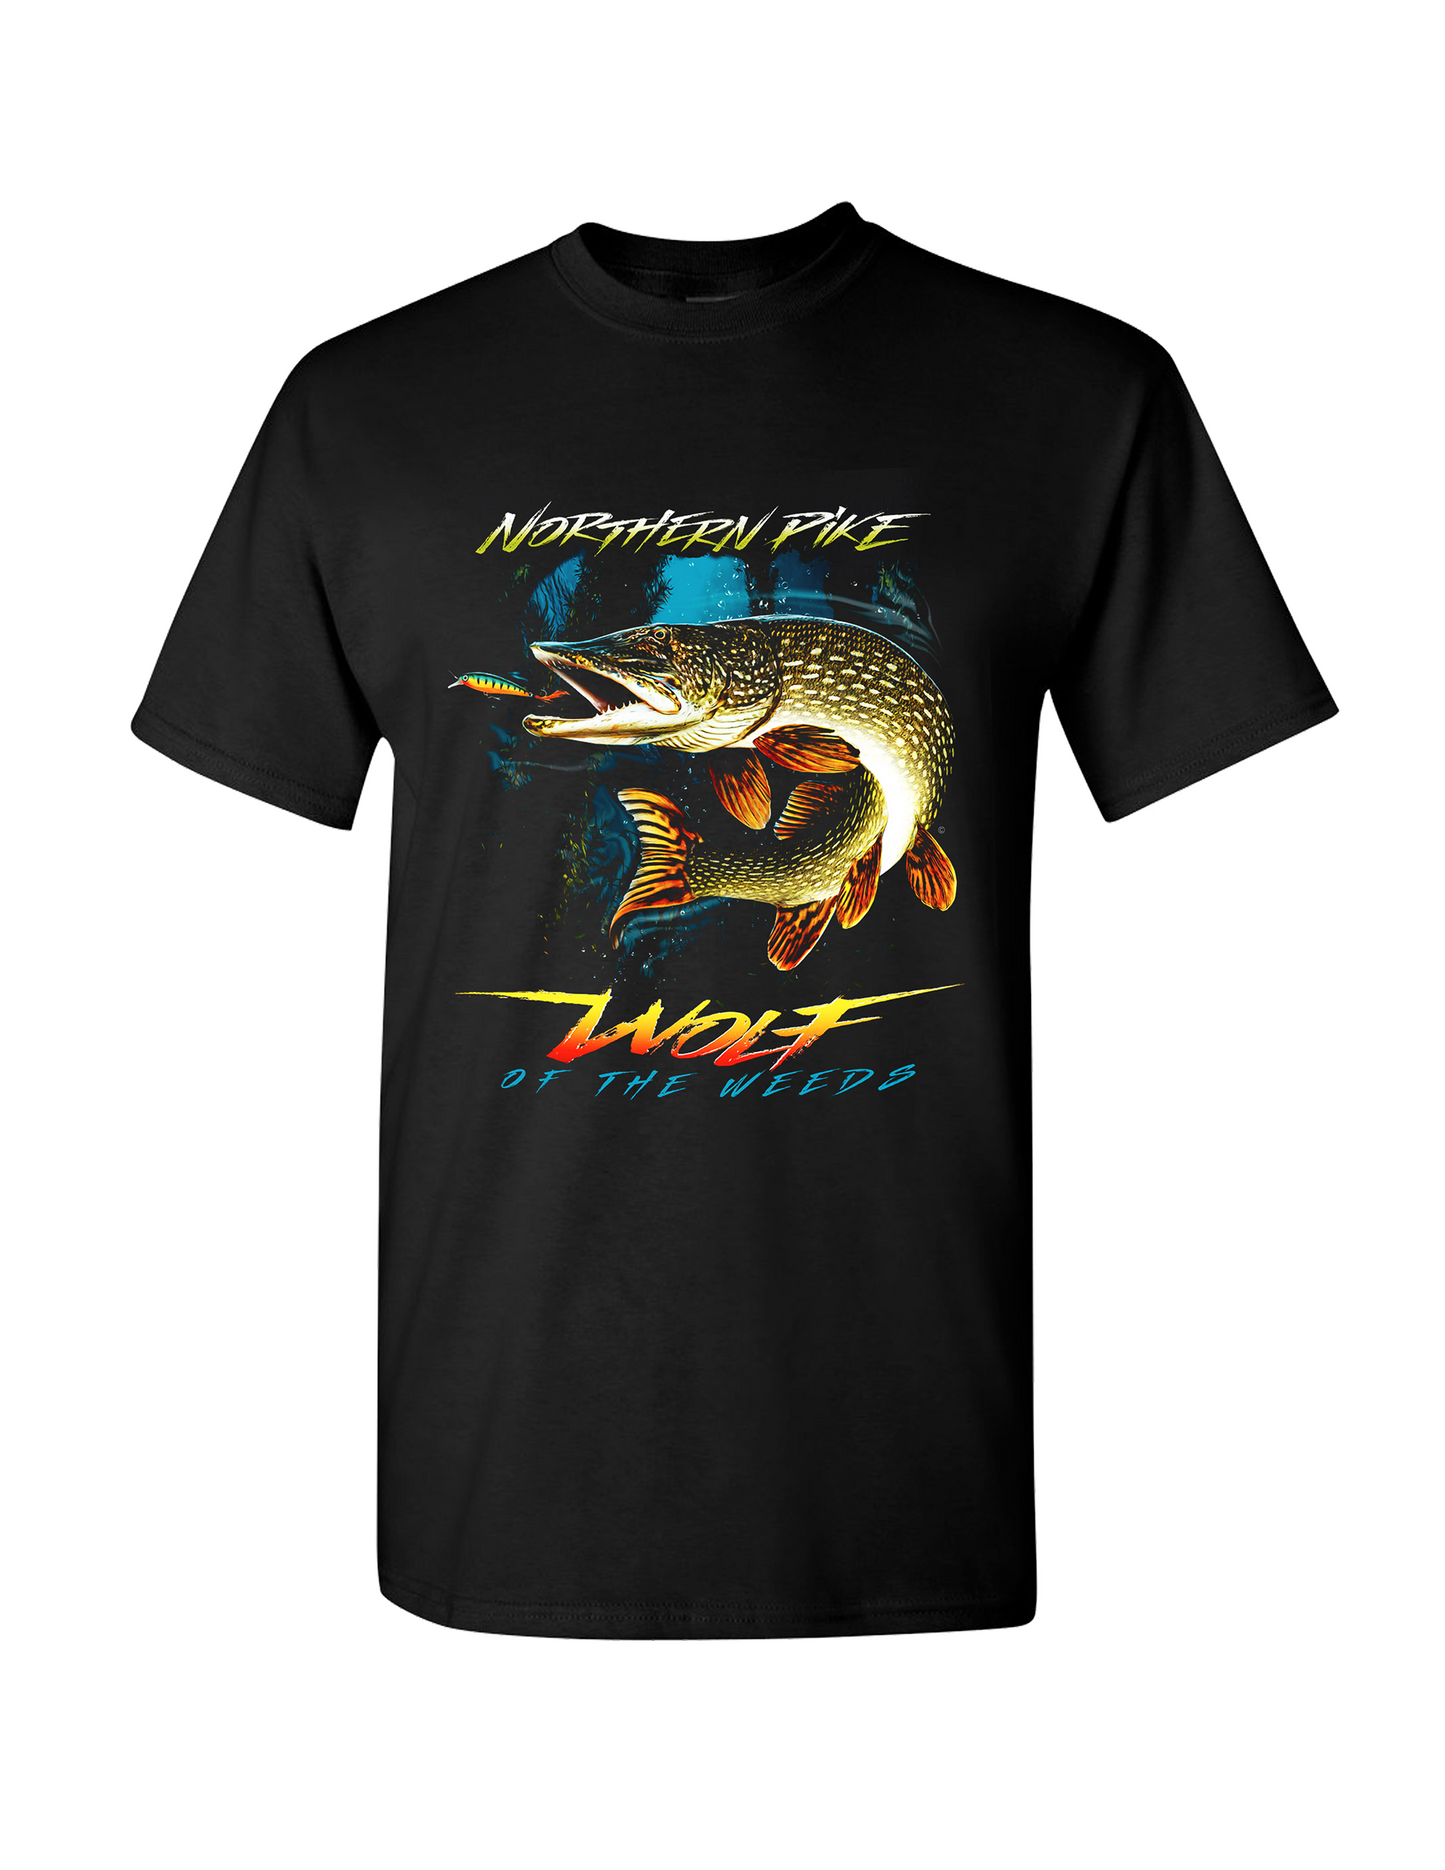 Northern Pike “Wolf of the Weeds” T-Shirt and Can Cooler Combos Gift Set